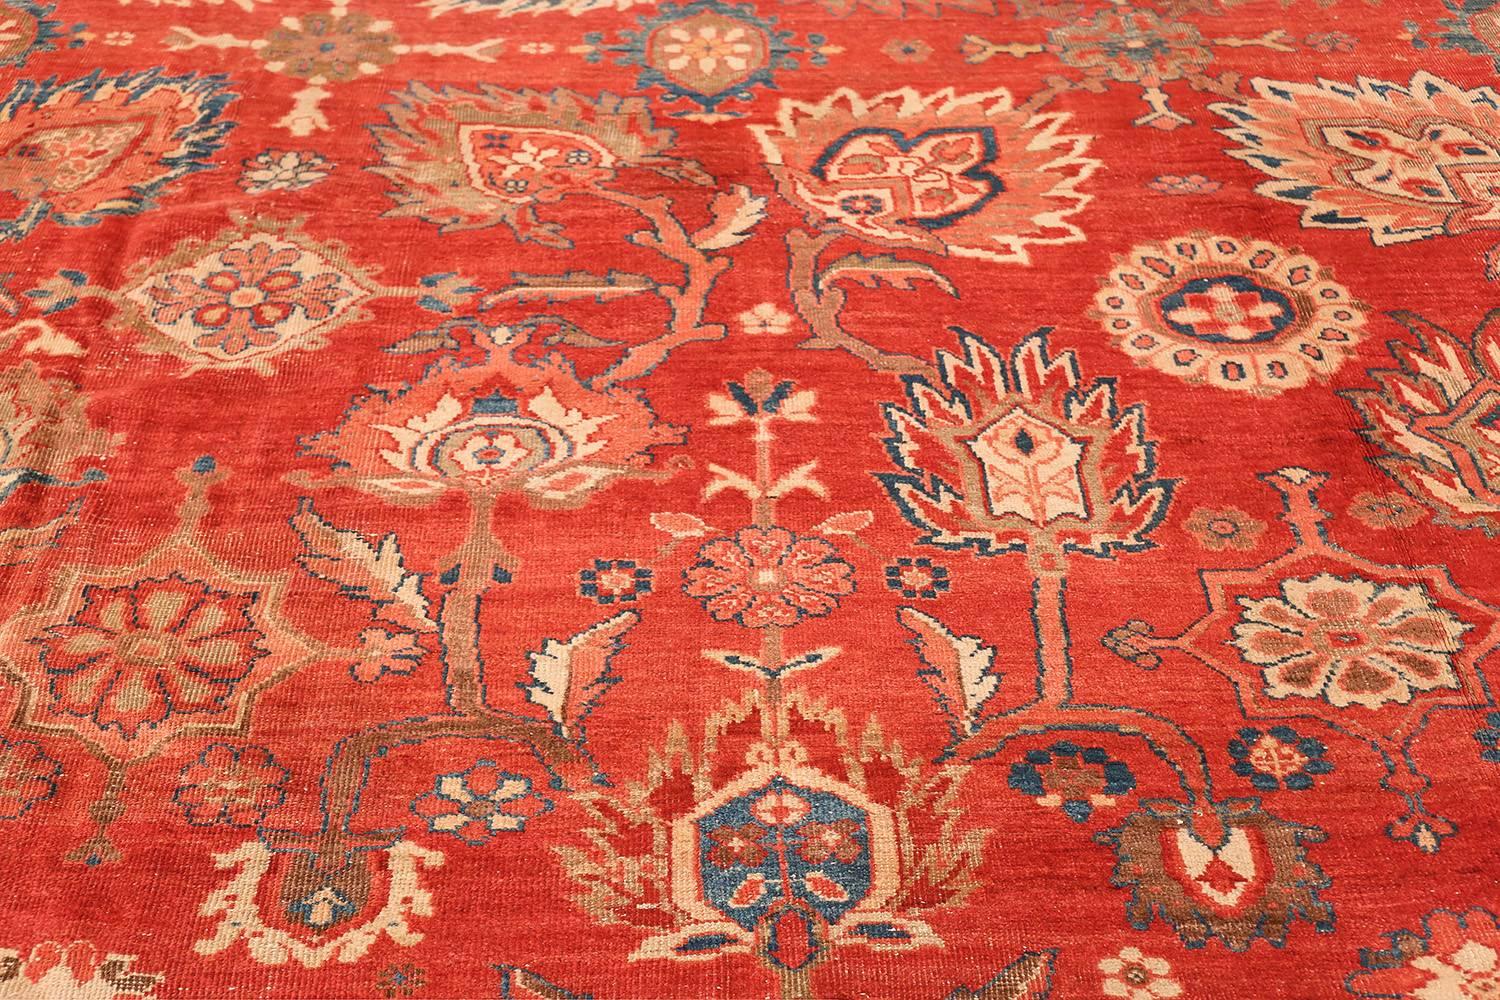 Wool Largw Oversize Red Antique Persian Sultanabad Rug. Size: 14 ft x 21 ft